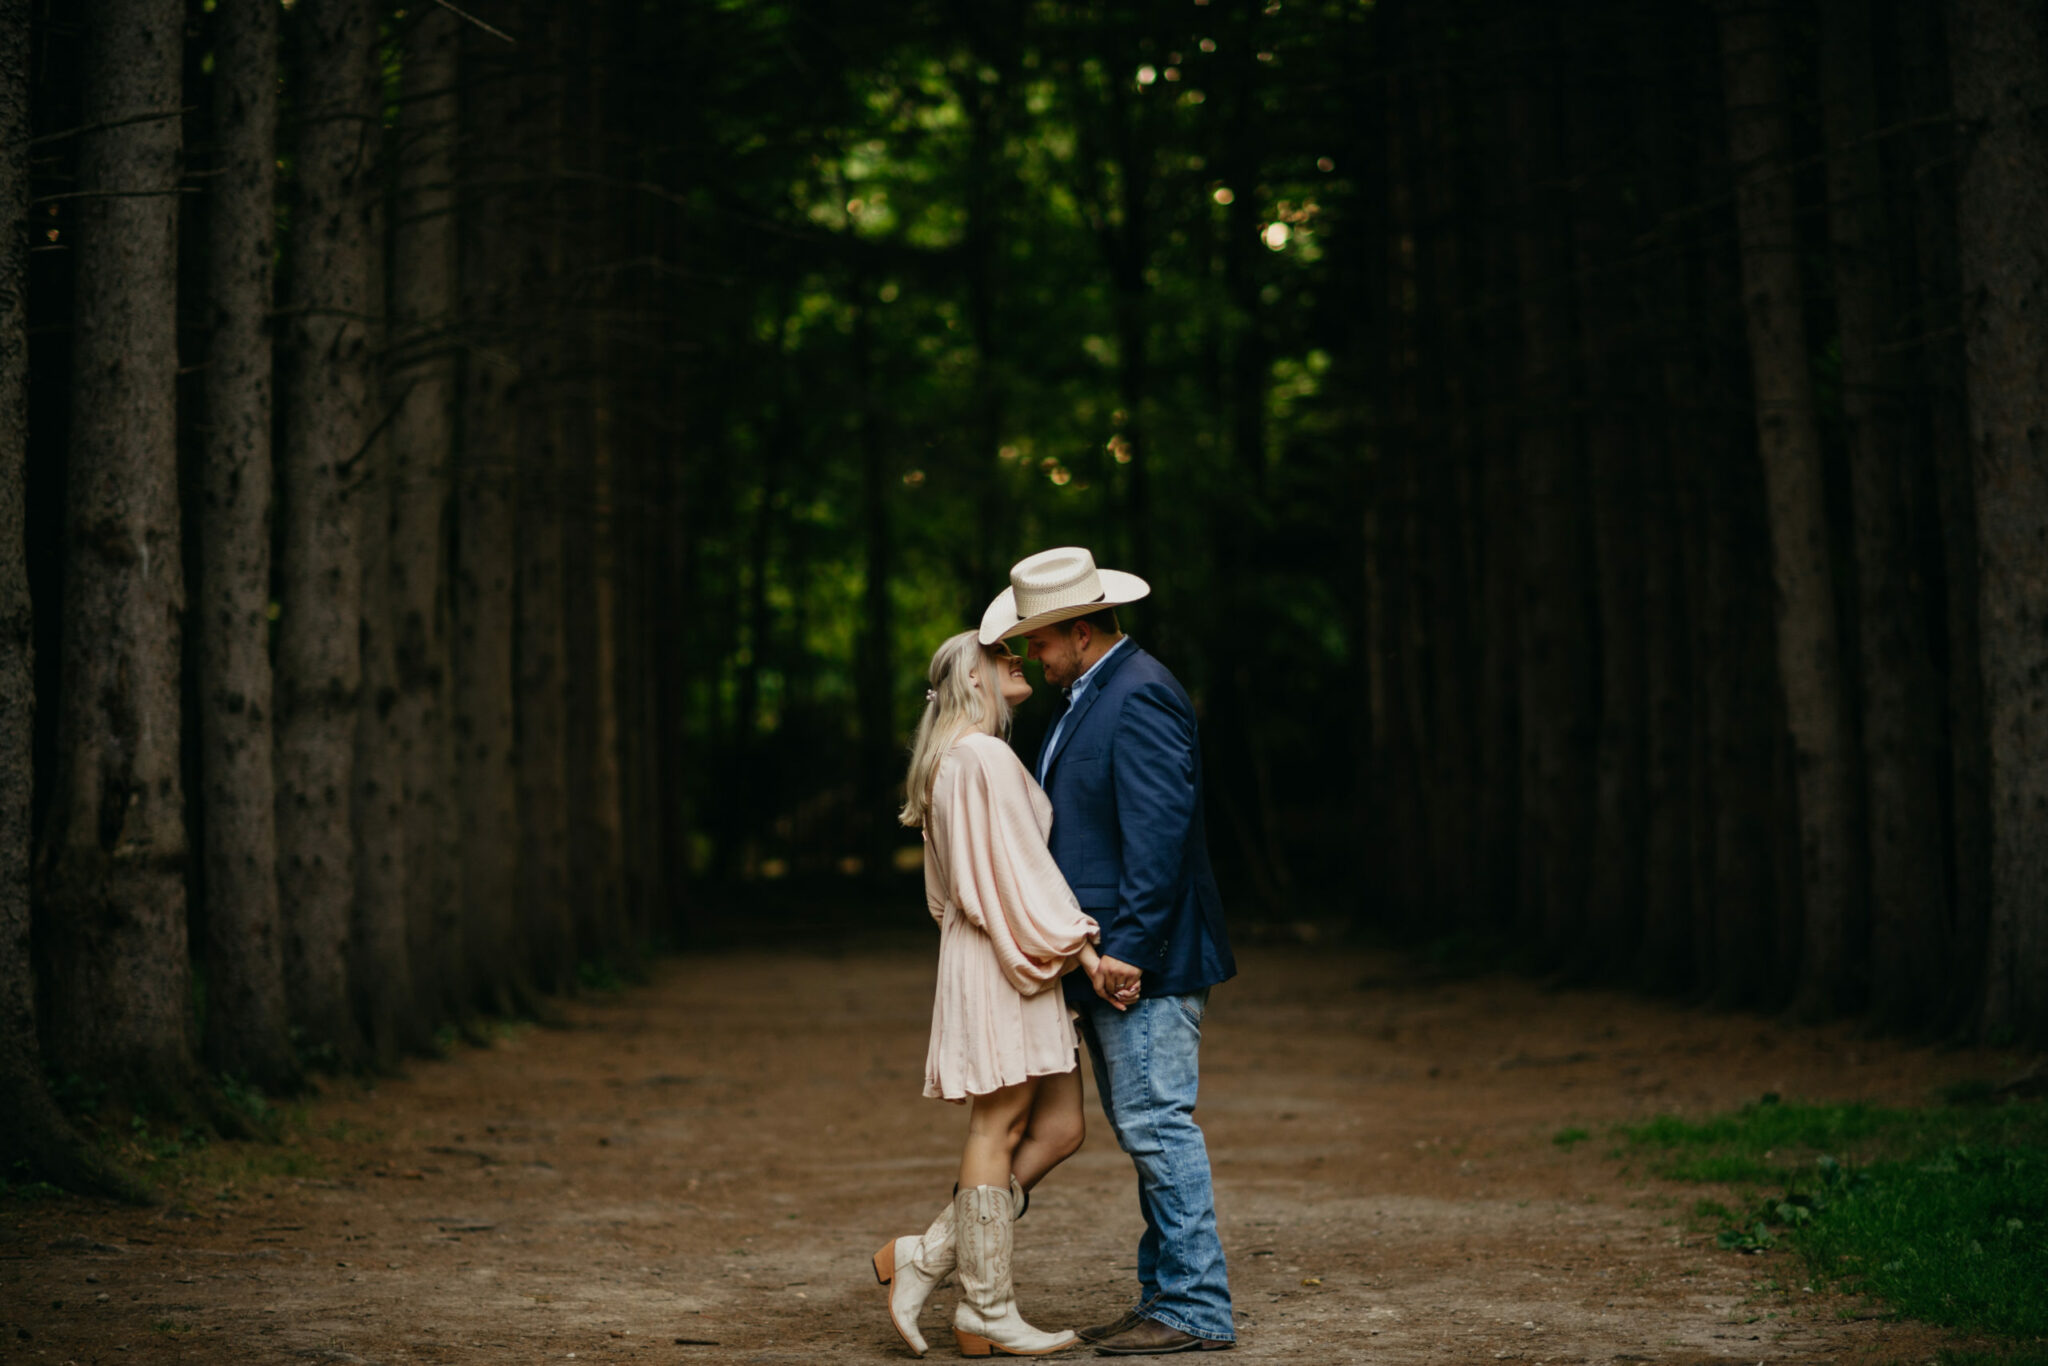 If there's a time of the year where I love sessions the most, it would be right now! Hannah & Quinn's summer sunset Stony Creek Metropark engagement was beyond anything I could've hoped for for them!